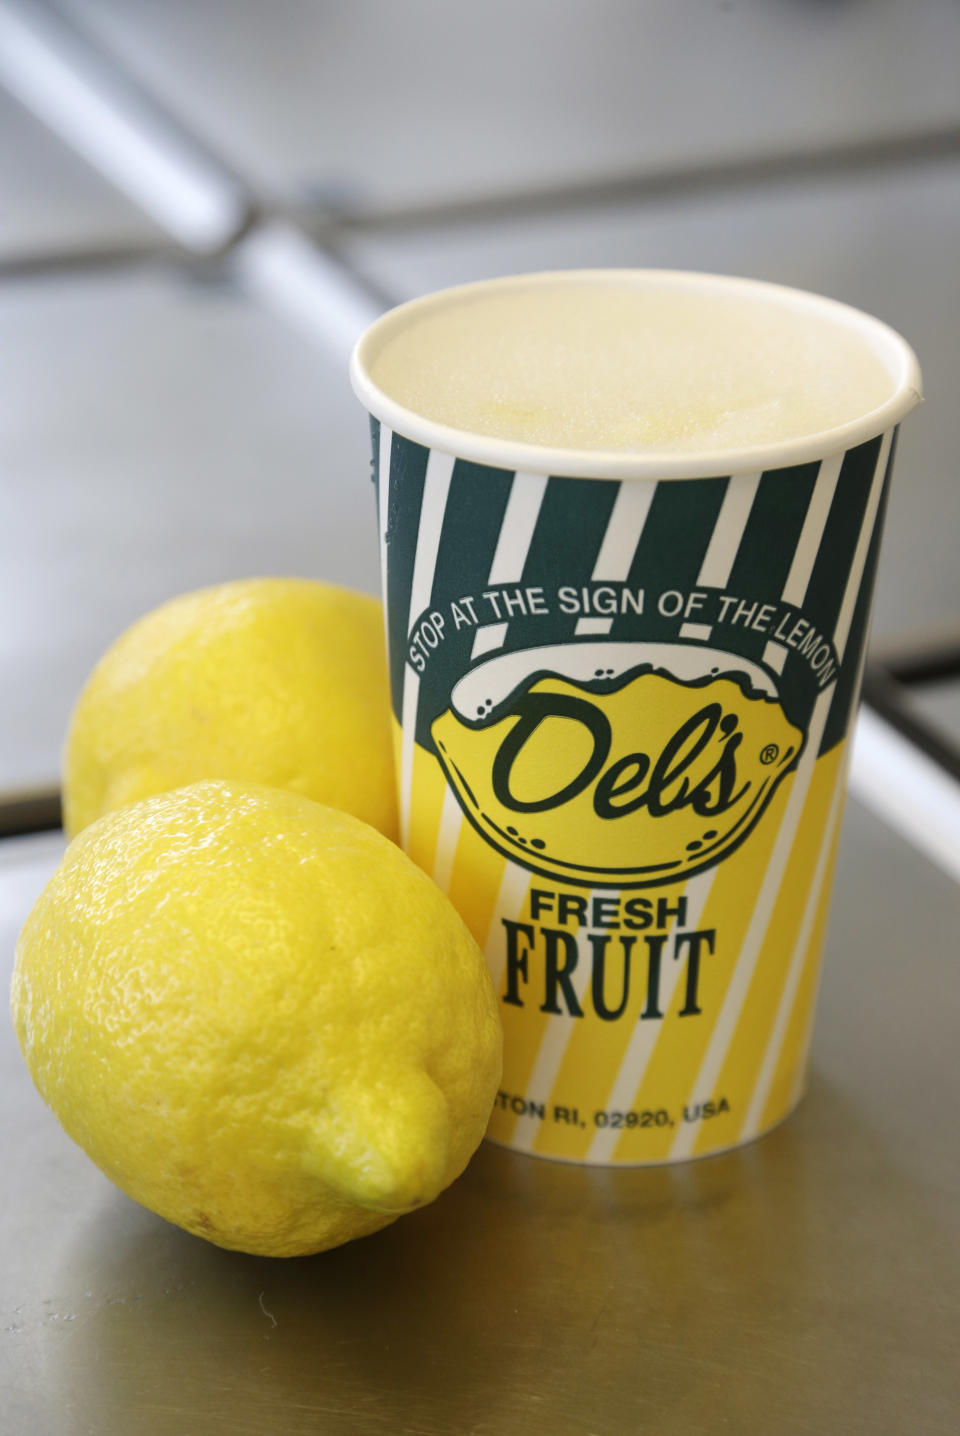 This April 30, 2014 photo shows fresh lemons near a frozen lemonade drink at a Del's Lemonade location in Cranston, R.I. The lemony slush, made of water, sugar, lemon juice and chunks of rind, has become a cultural icon in the state. It's not unusual to see the trucks or carts at wedding receptions, birthday parties, bar mitzvahs, and troop deployments and homecomings. (AP Photo/Steven Senne)